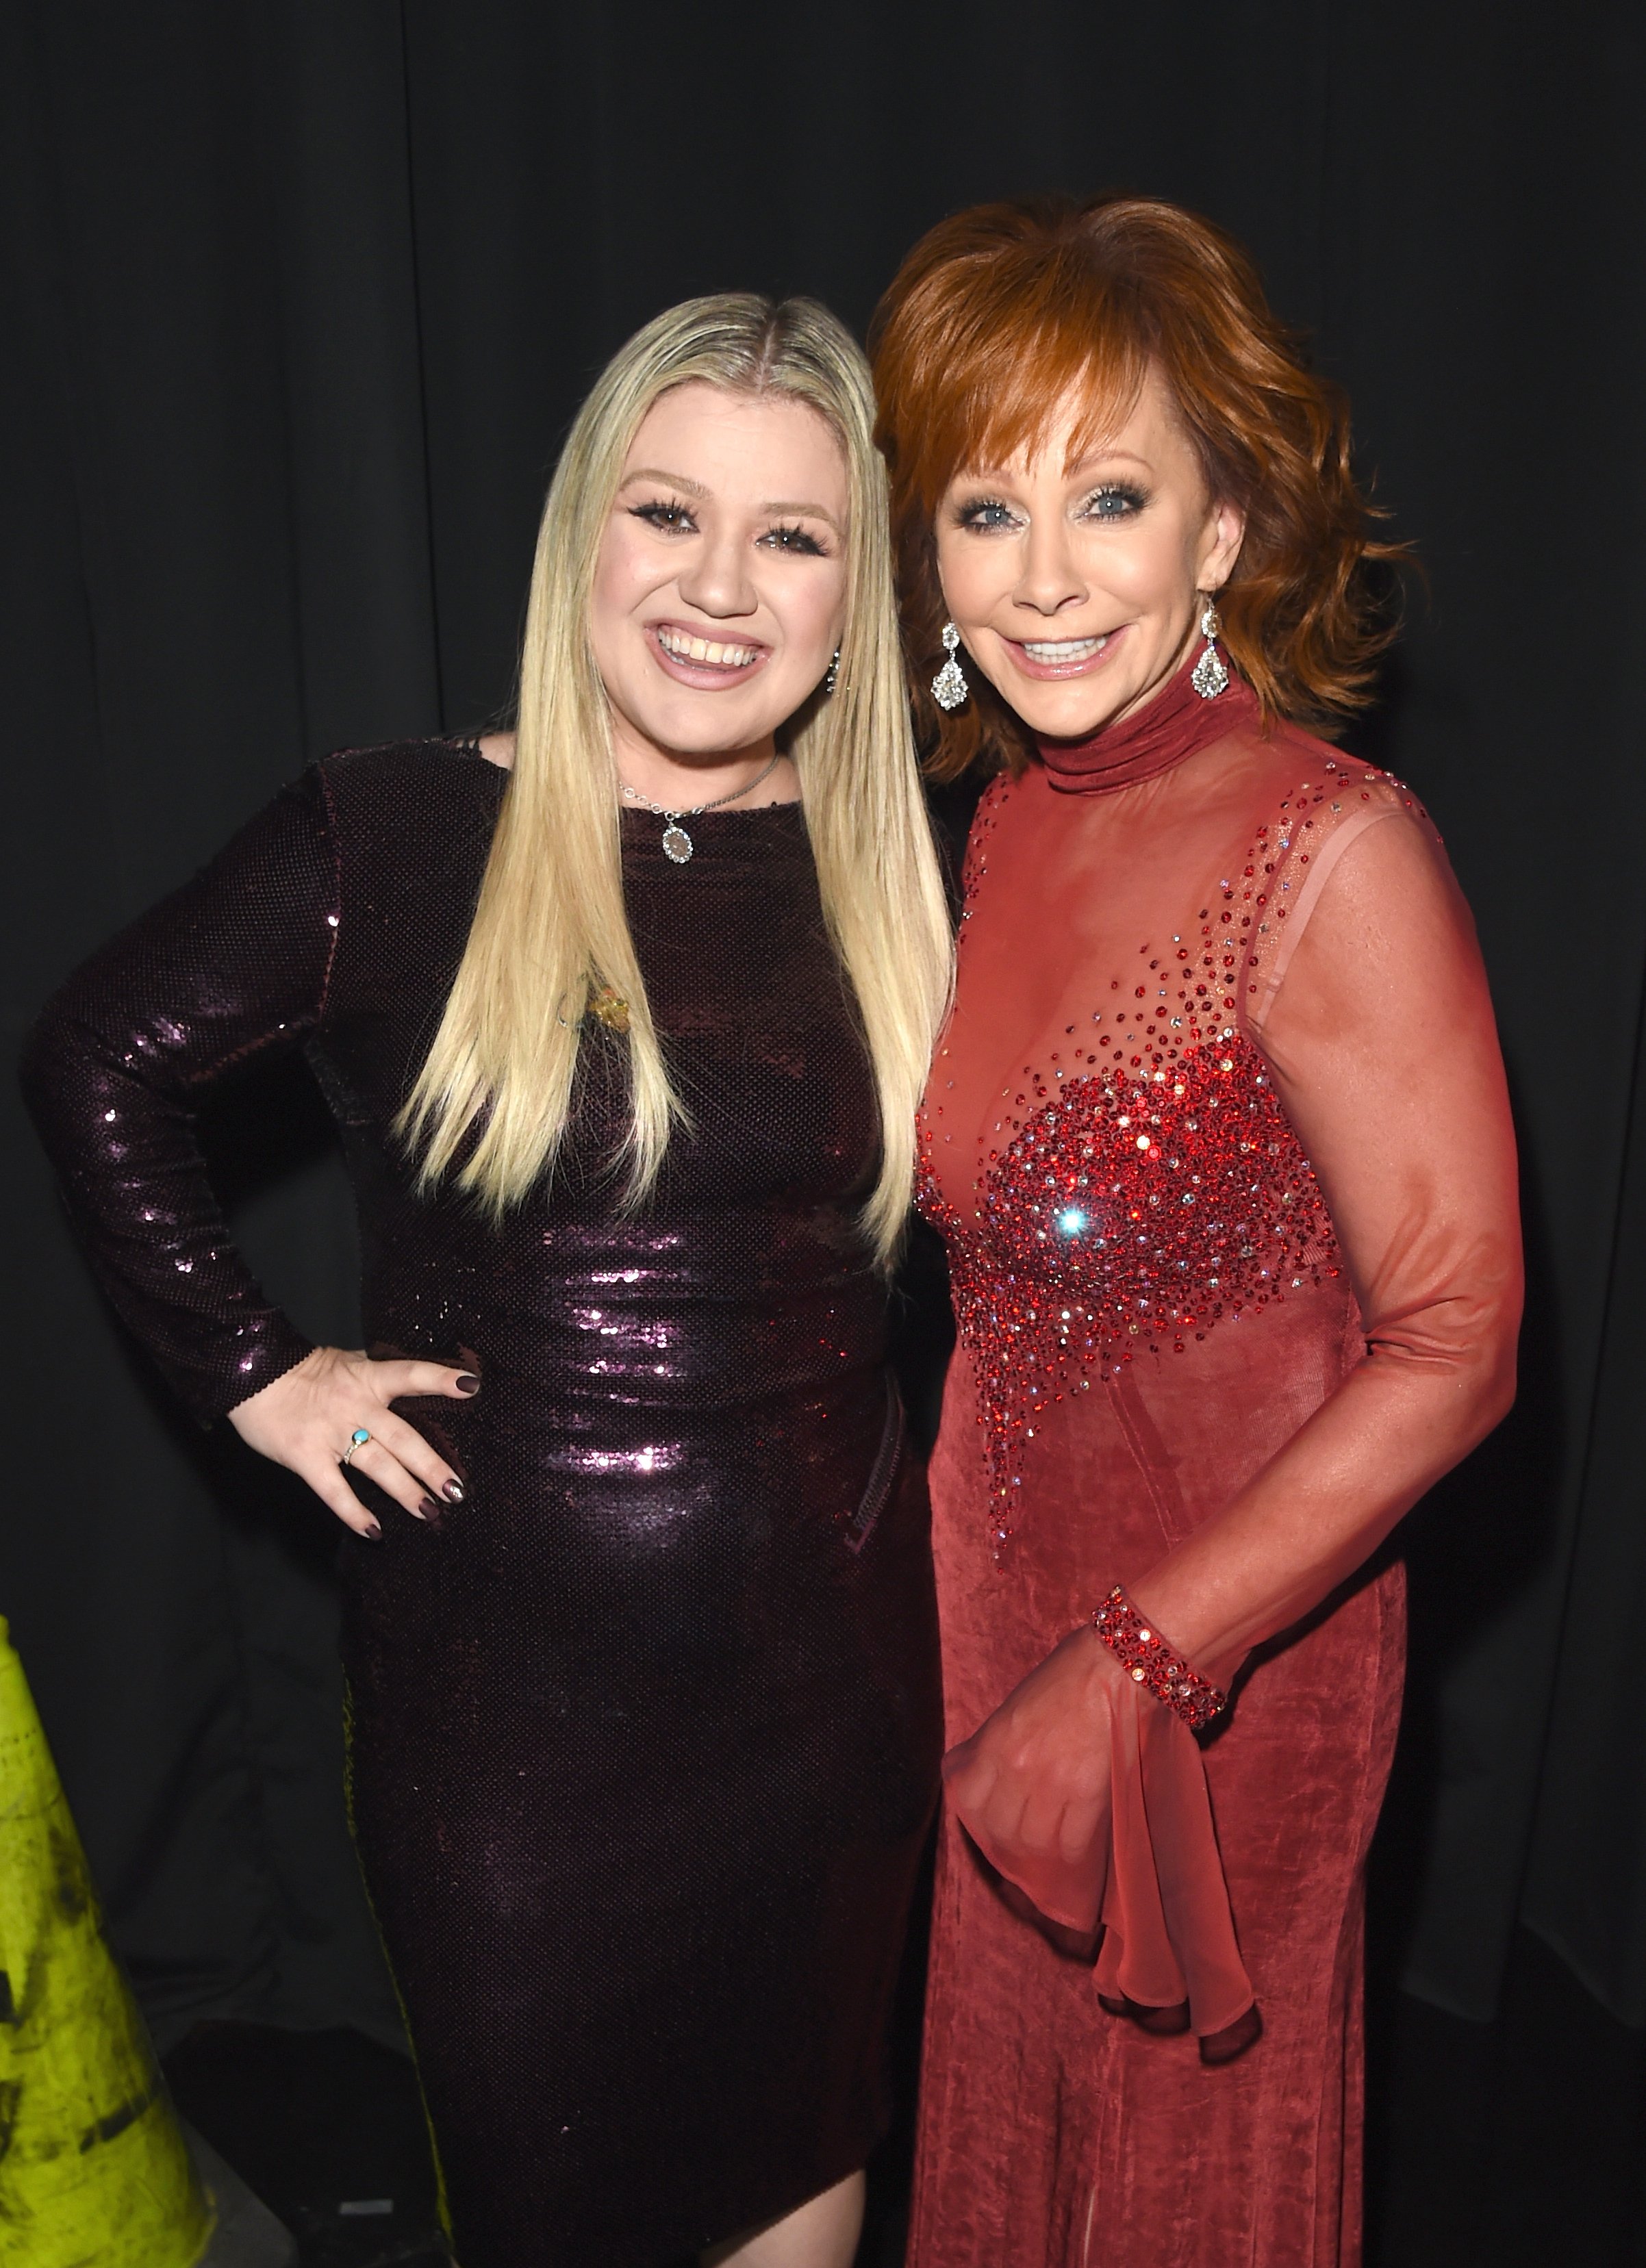 Kelly Clarkson and Reba McEntire on April 15, 2018 in Las Vegas, Nevada | Source: Getty Images